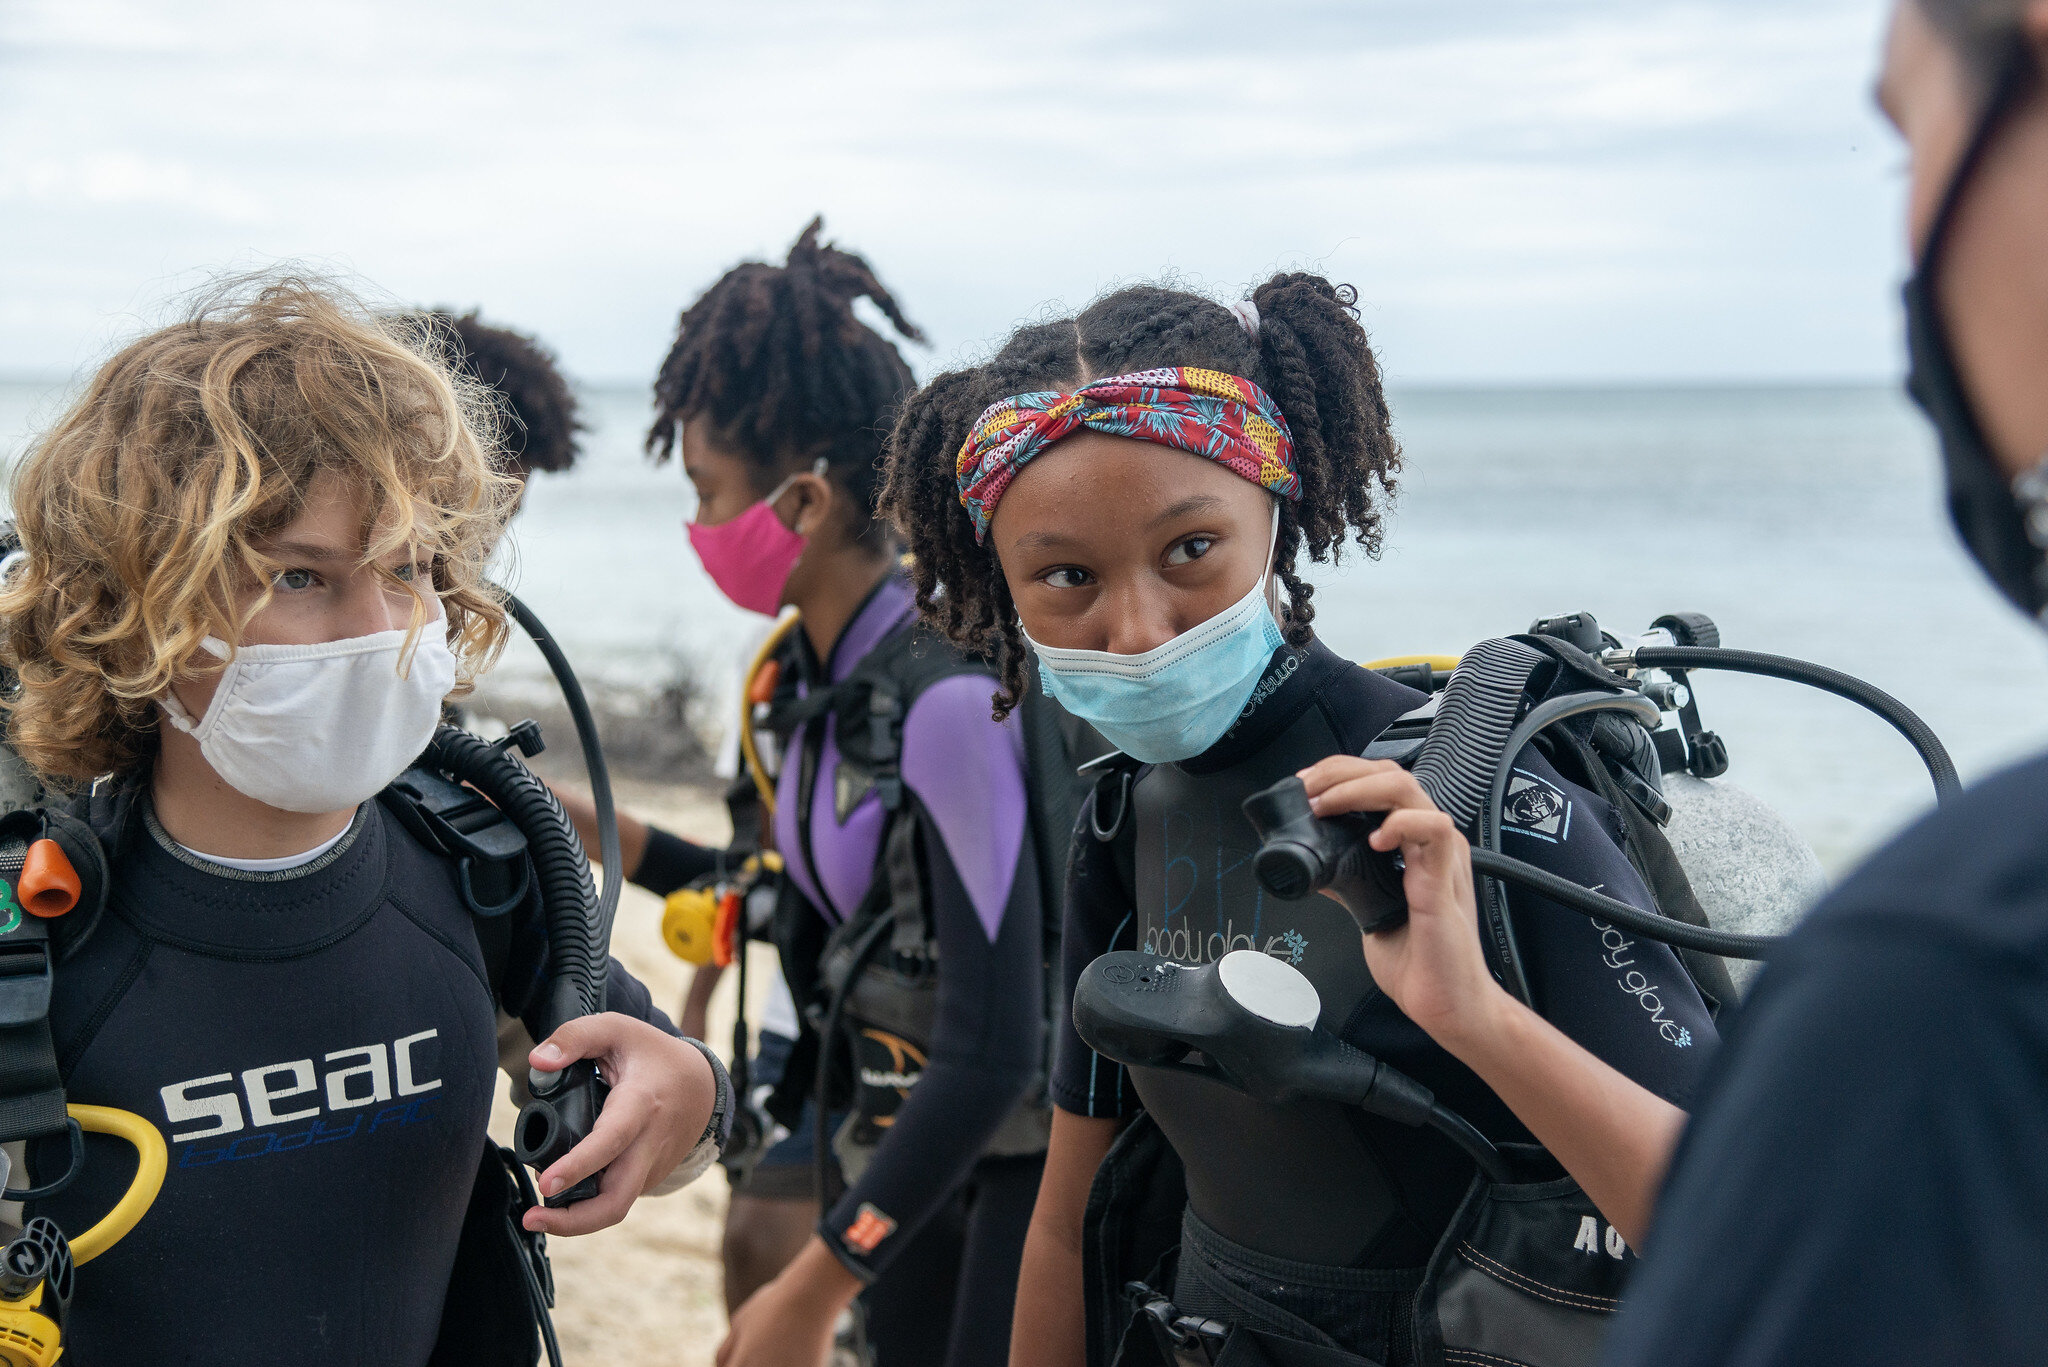 Once permitted, DCMS students attended in-person school and also participated in their experiential School Without Walls program on the Cape, studying the surrounding environment and completing SCUBA certifications.